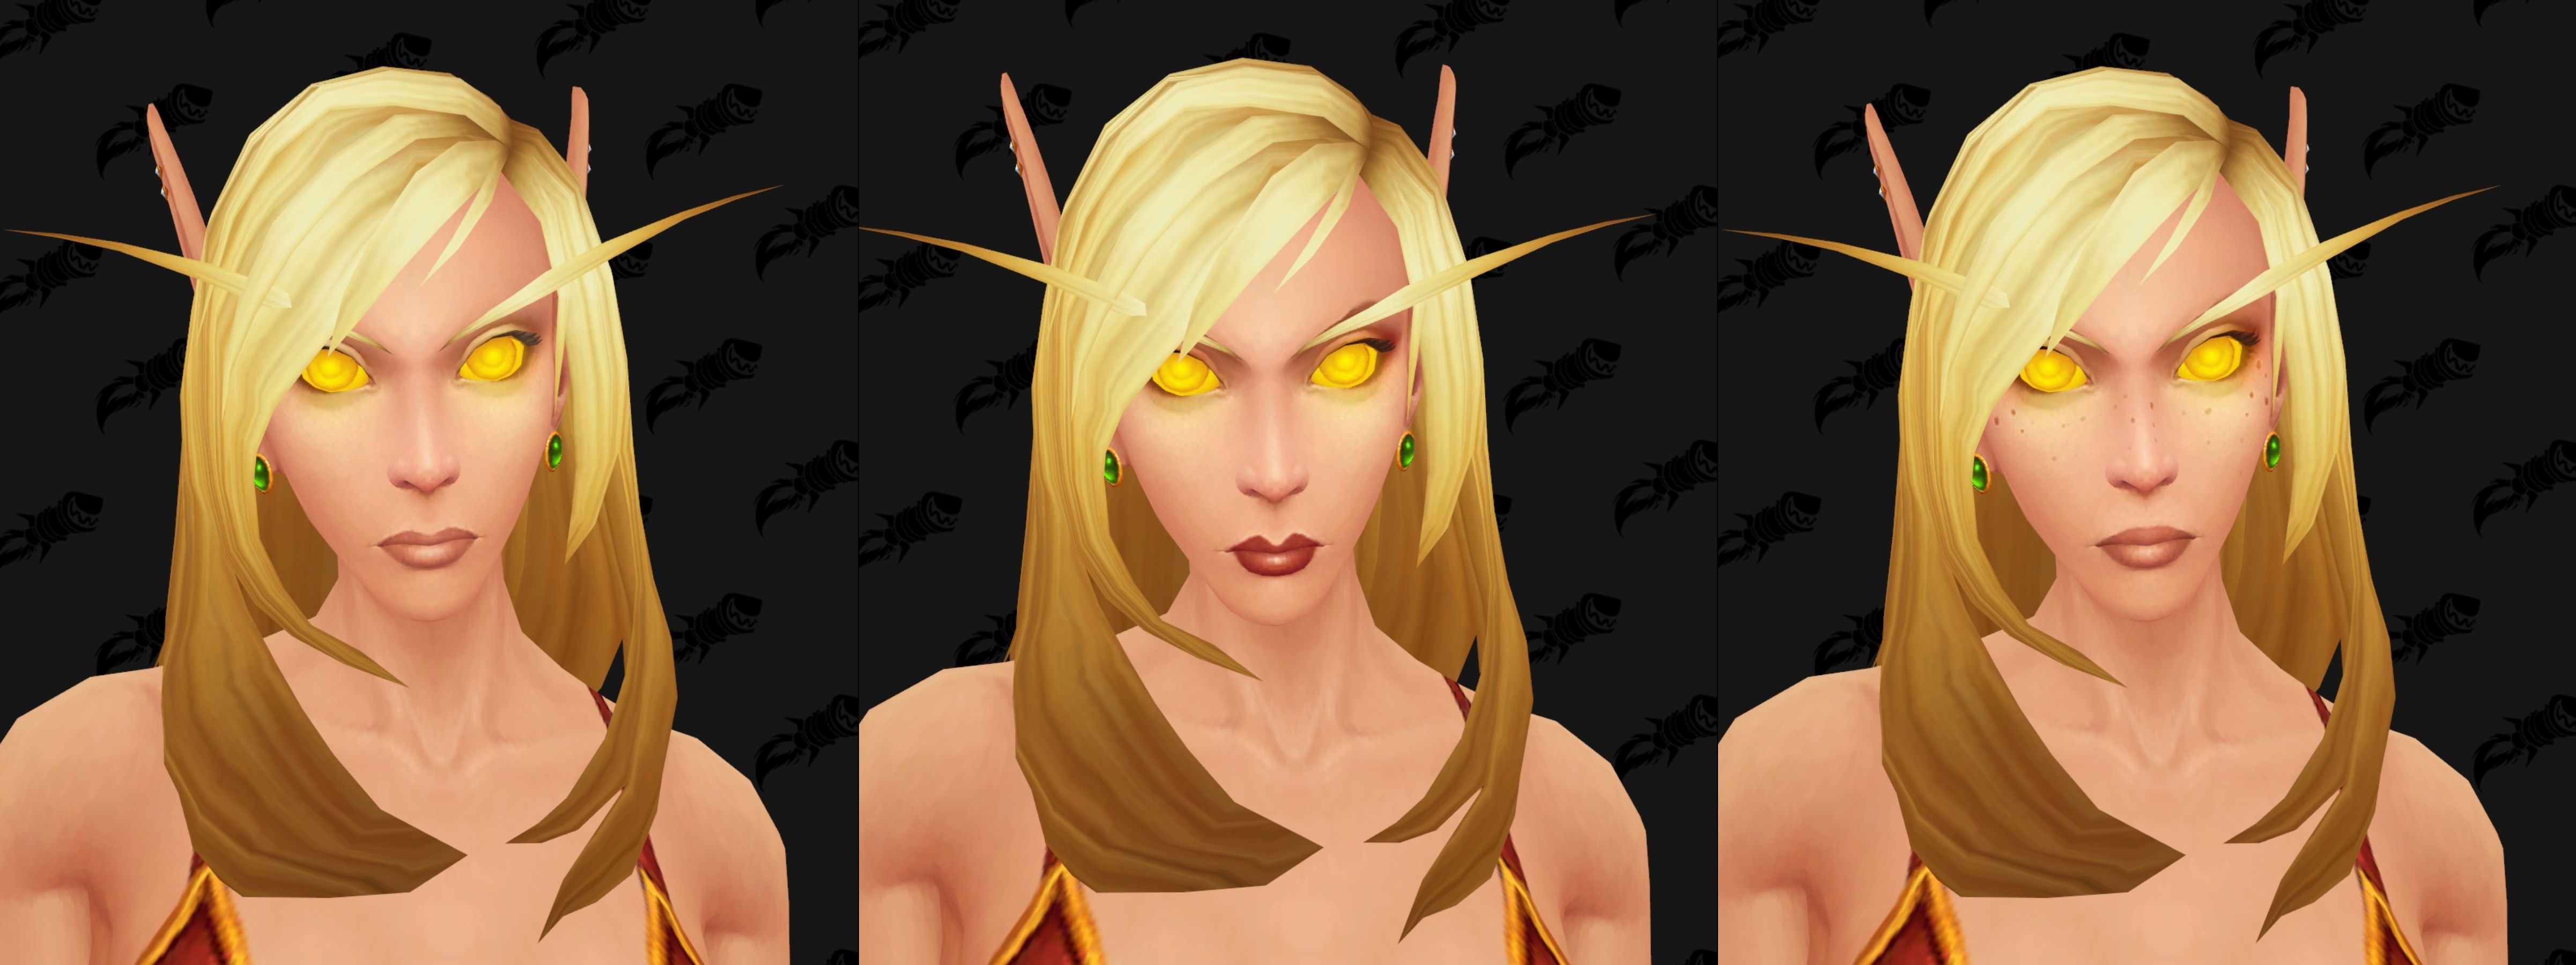 blood elf customization - golden eyes and three new faces